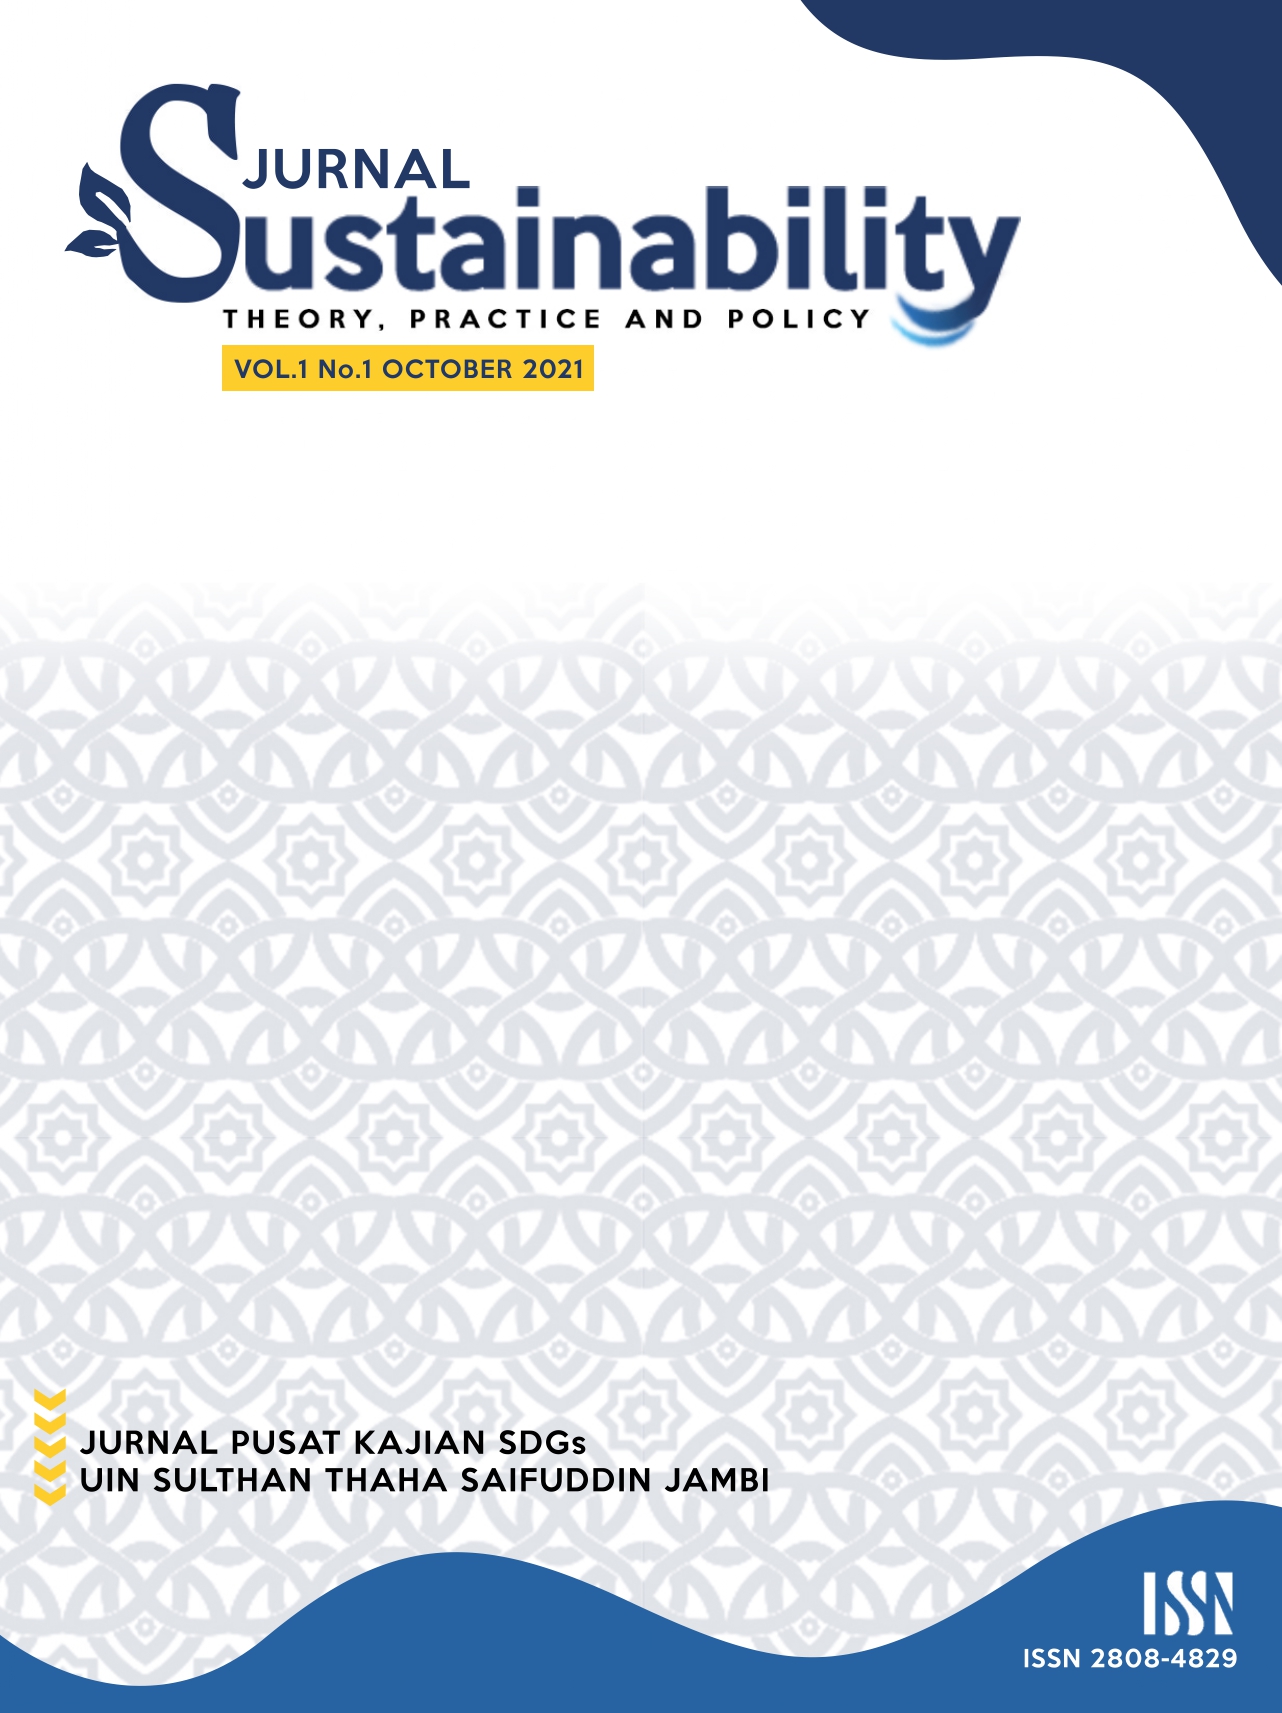 					View Vol. 1 No. 1 (2021): Sustainability: Theory, Practice and Policy October Edition
				